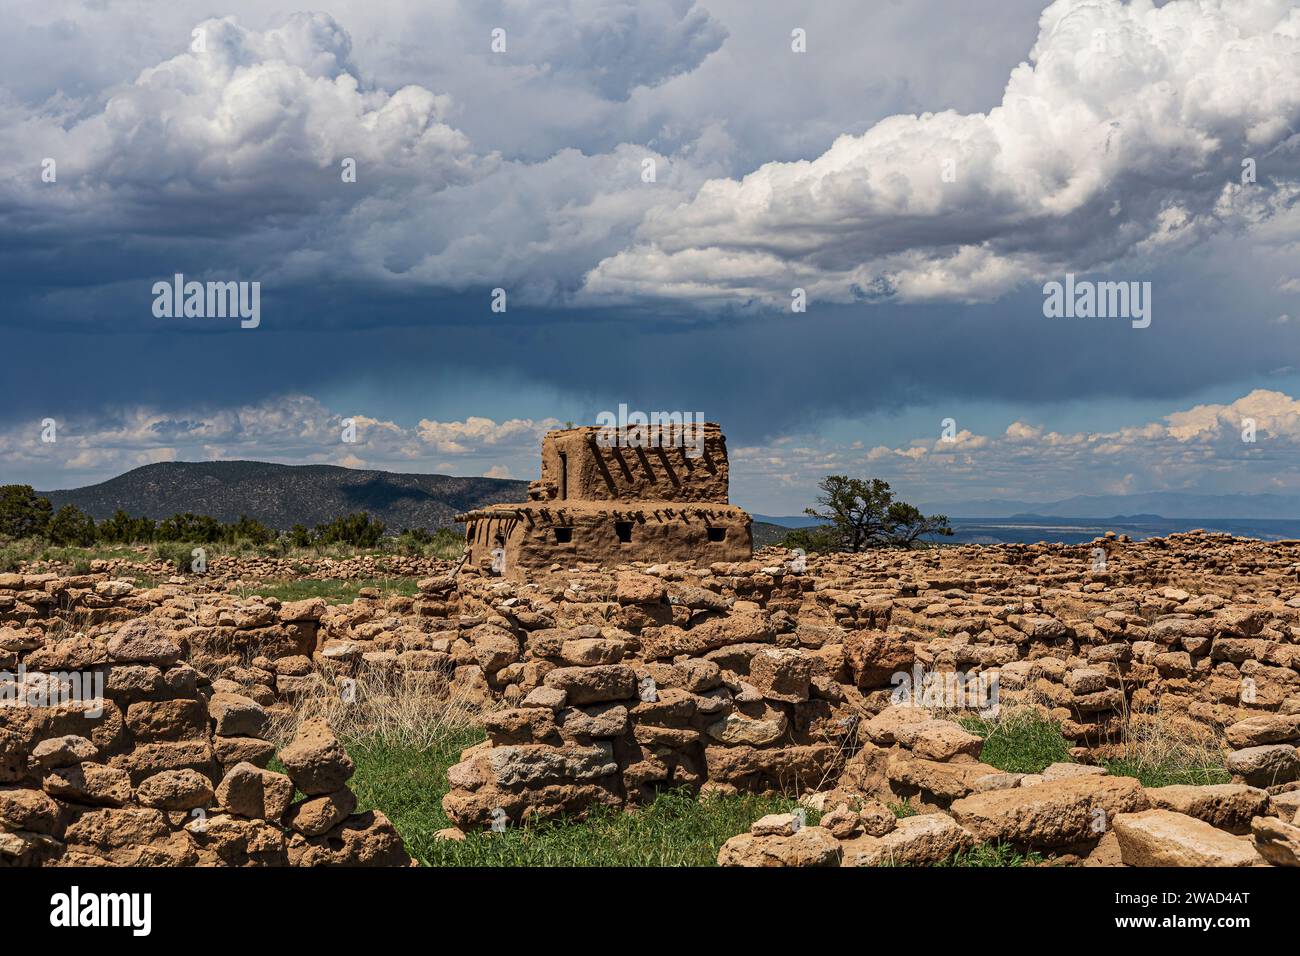 USA, New Mexico, Espanola, Puye Cliffs, Storm Clouds Over Puye Cliff Dwellings Foto Stock